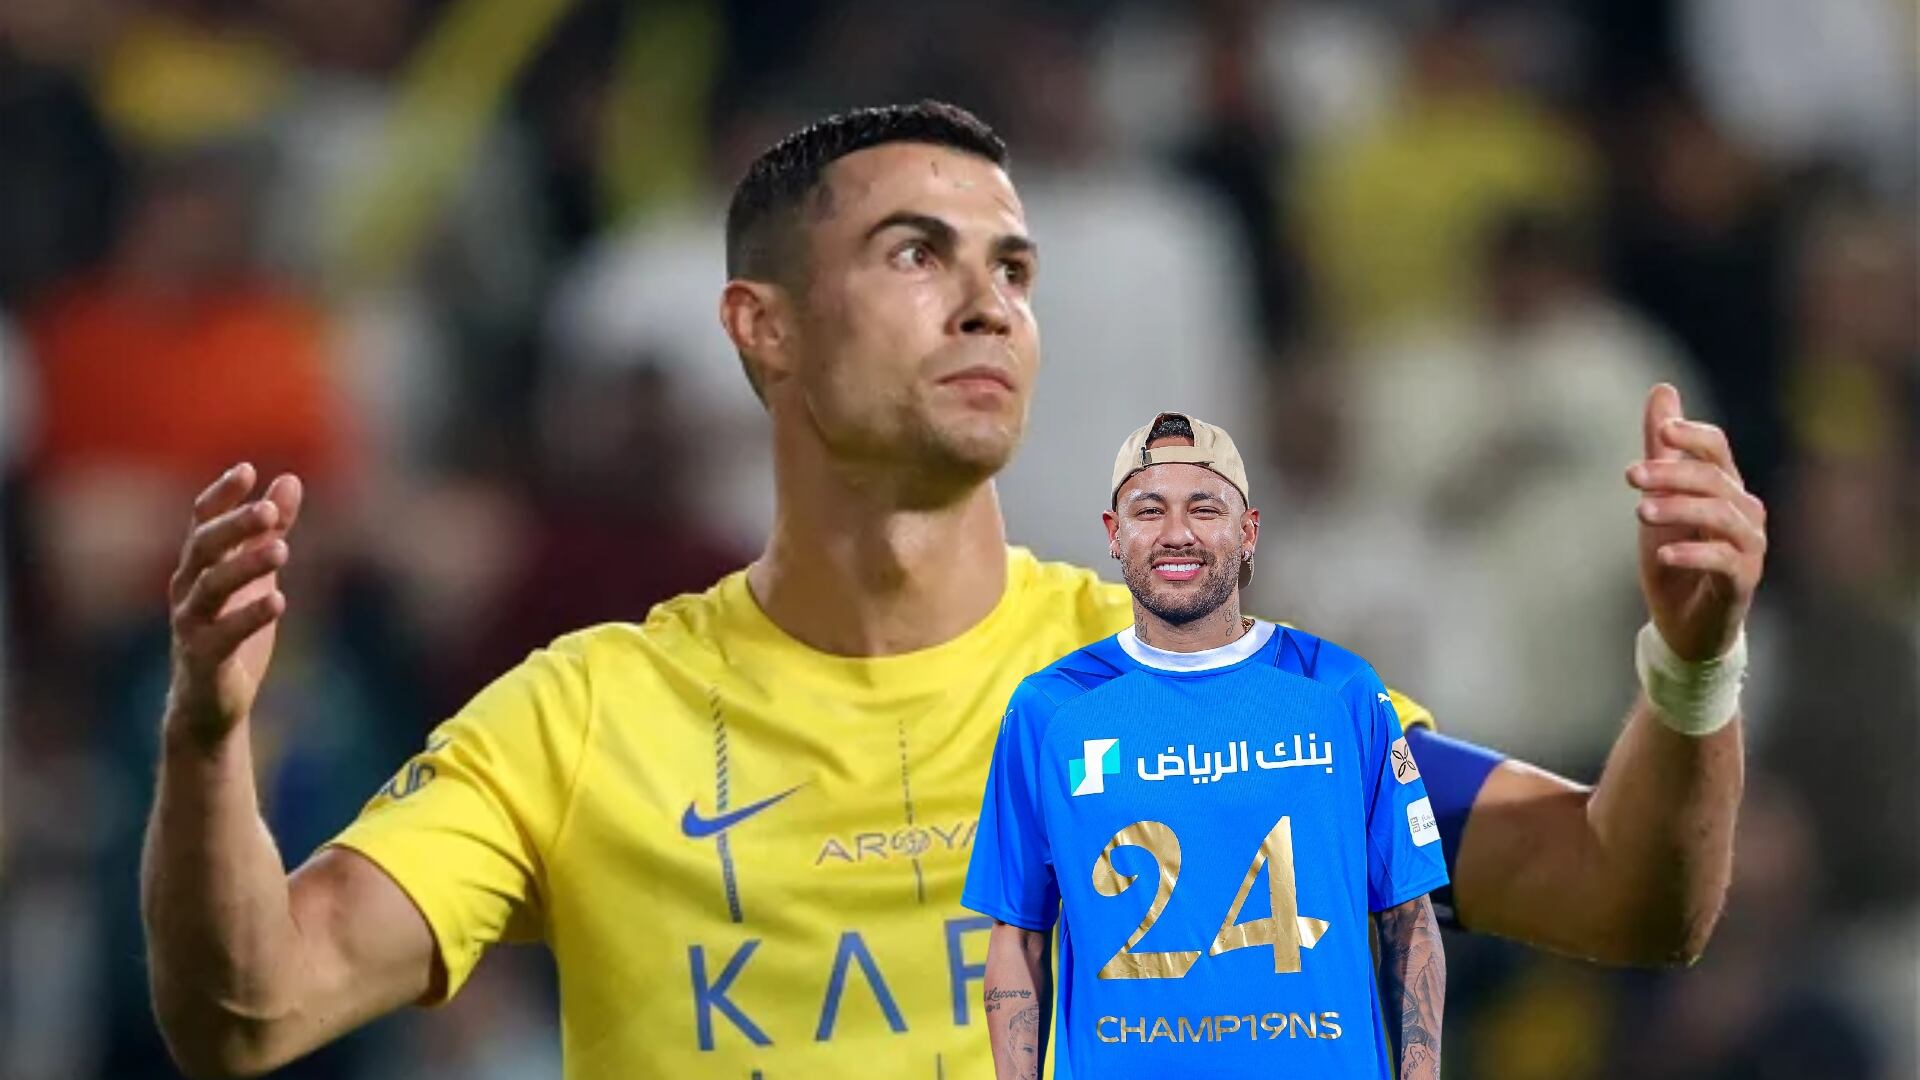 Cristiano won't like it, Neymar's Al Hilal is champion in Saudi and the humiliating gesture CR7 may do